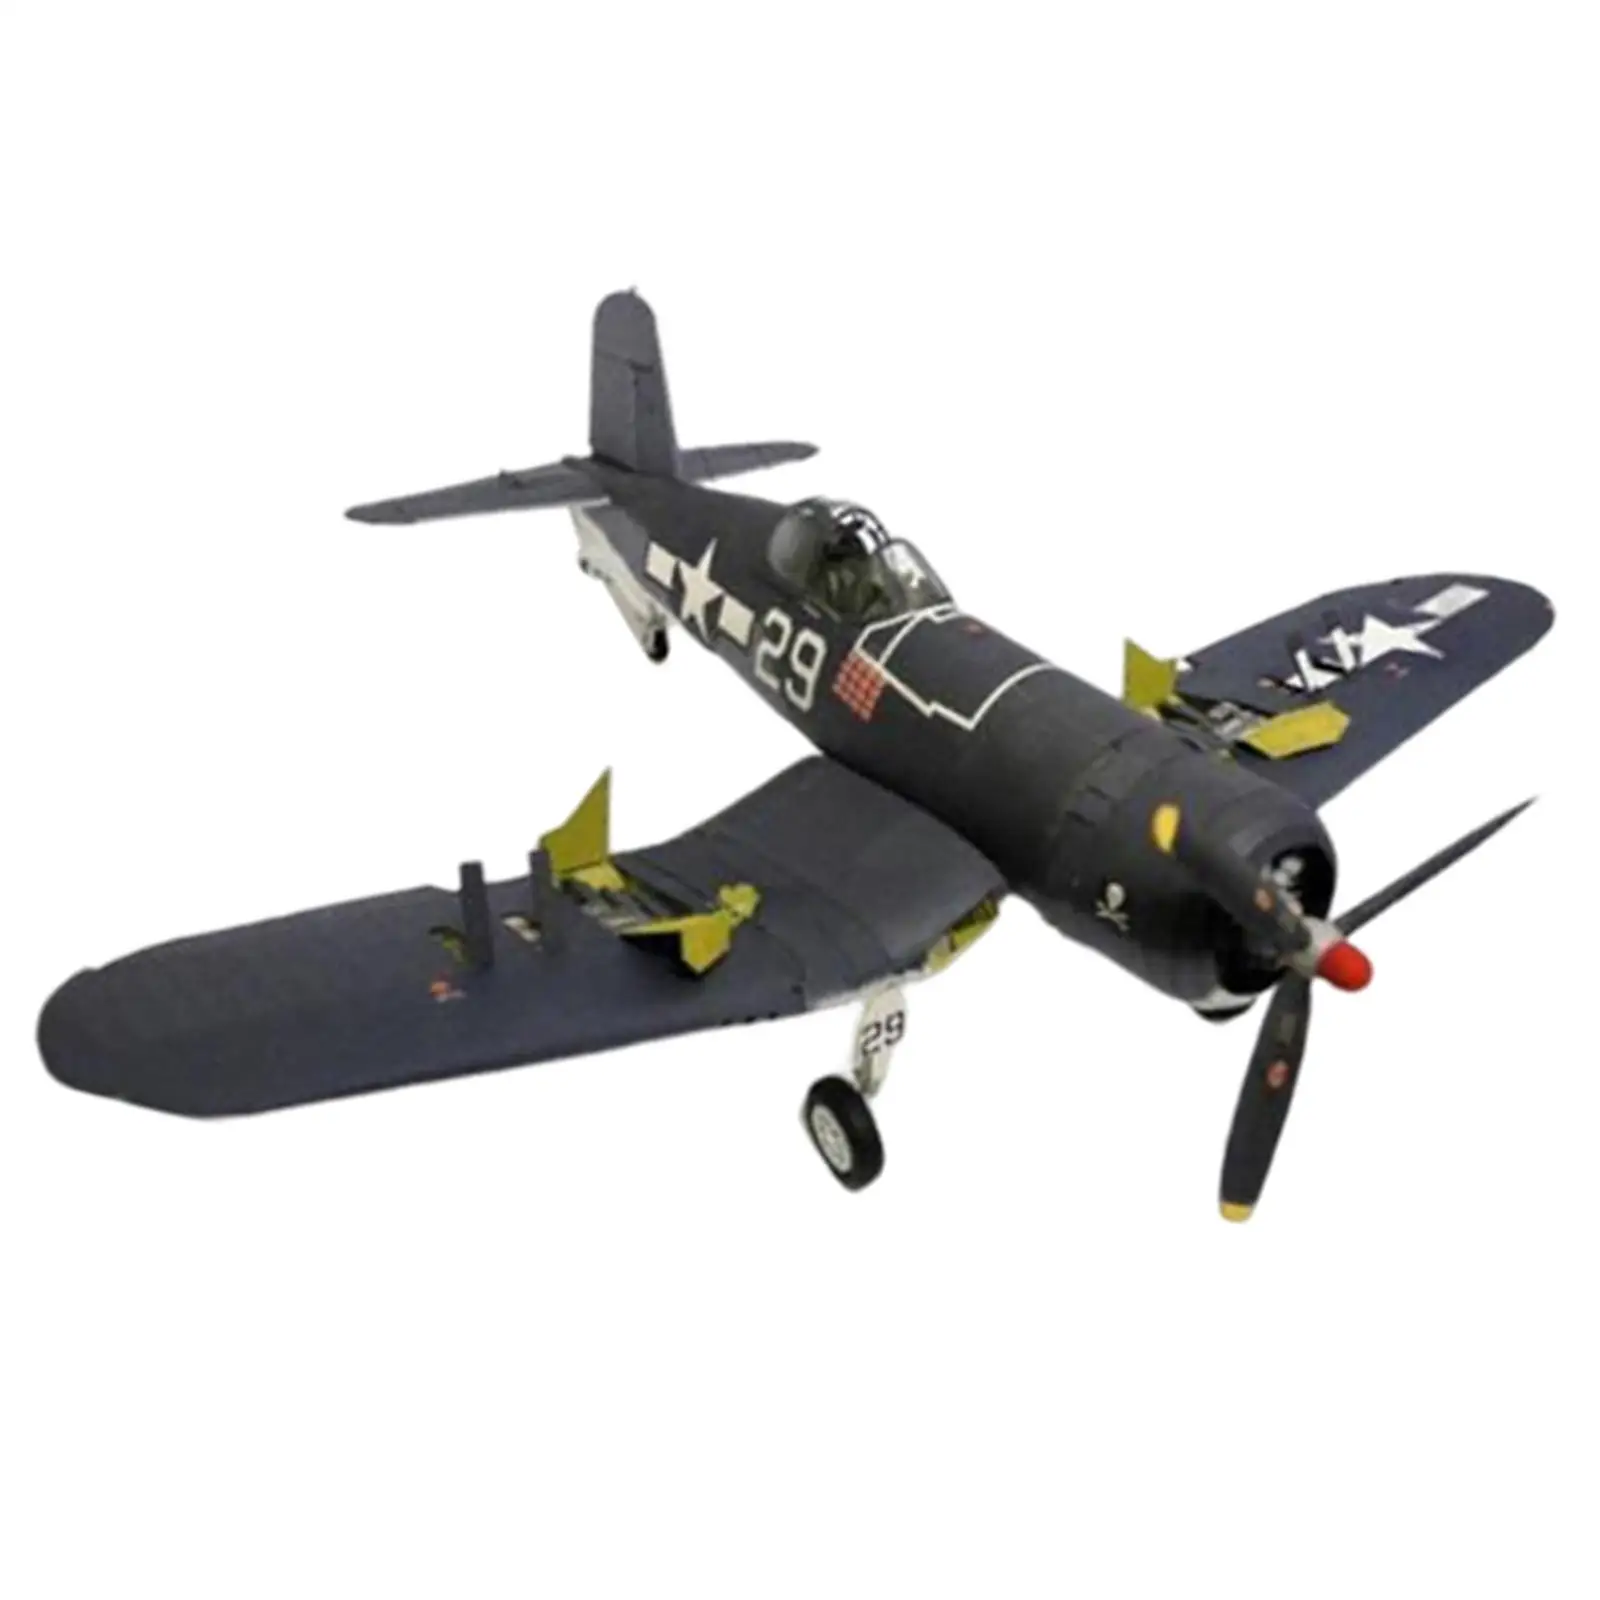 1/33 Fighter Model Aviation Plane Model Building Kits 3D Paper Puzzle DIY Assemble for Tabletop Decor Kids Adults Boys Gifts